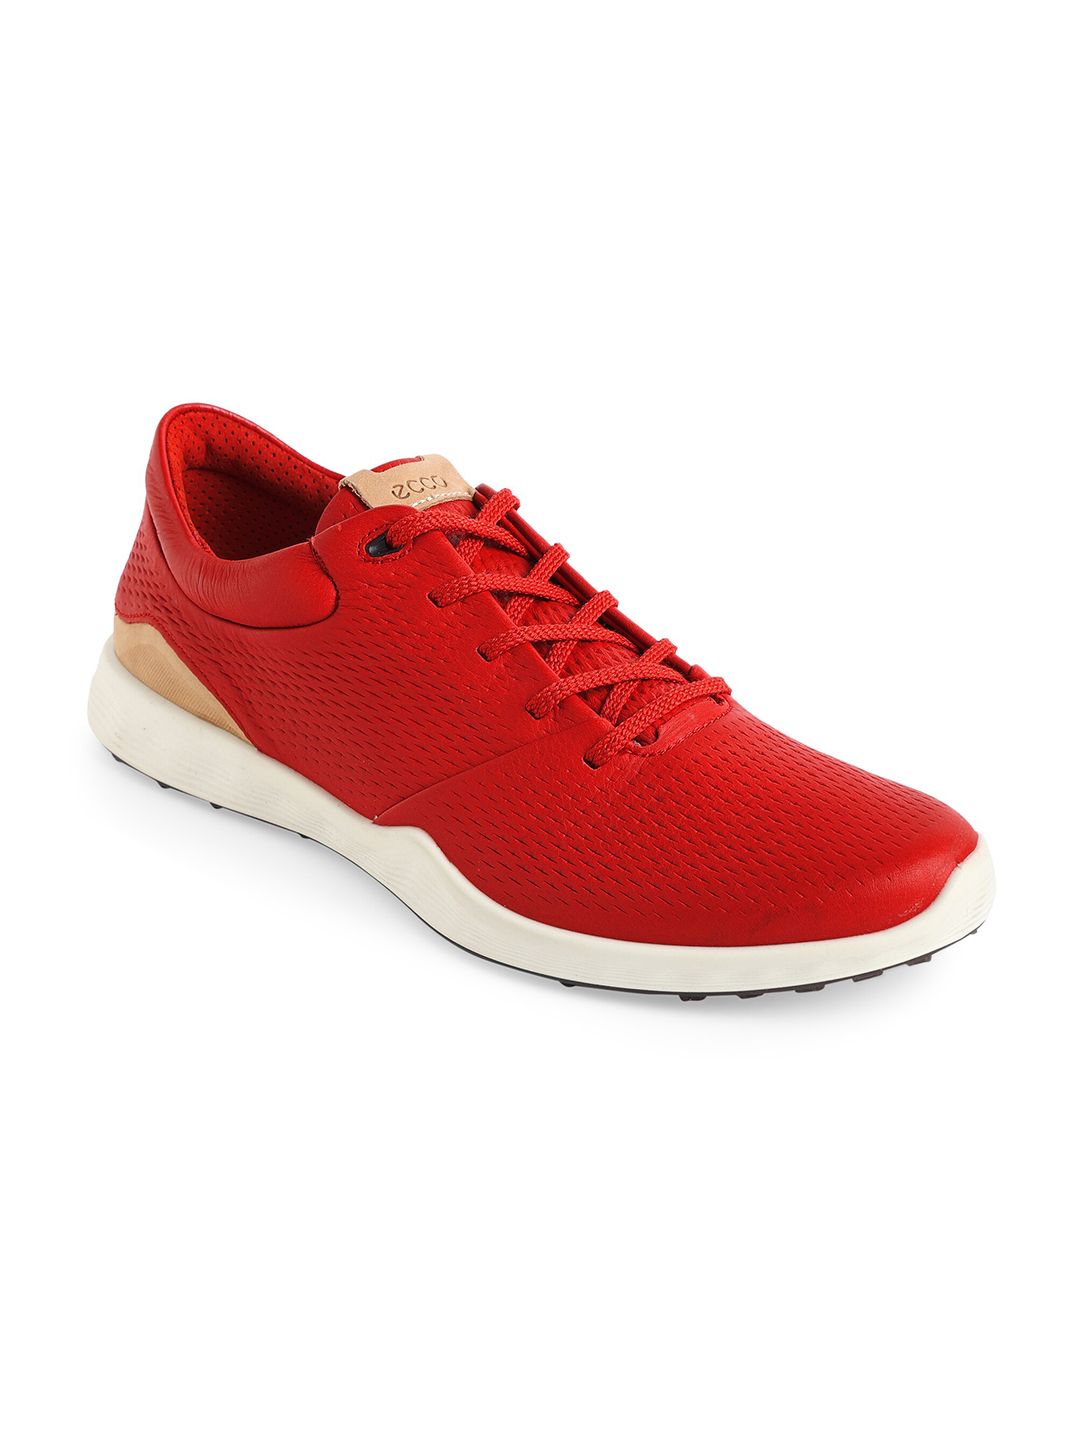 ECCO Women Red Leather Golf Non-Marking Shoes Price in India